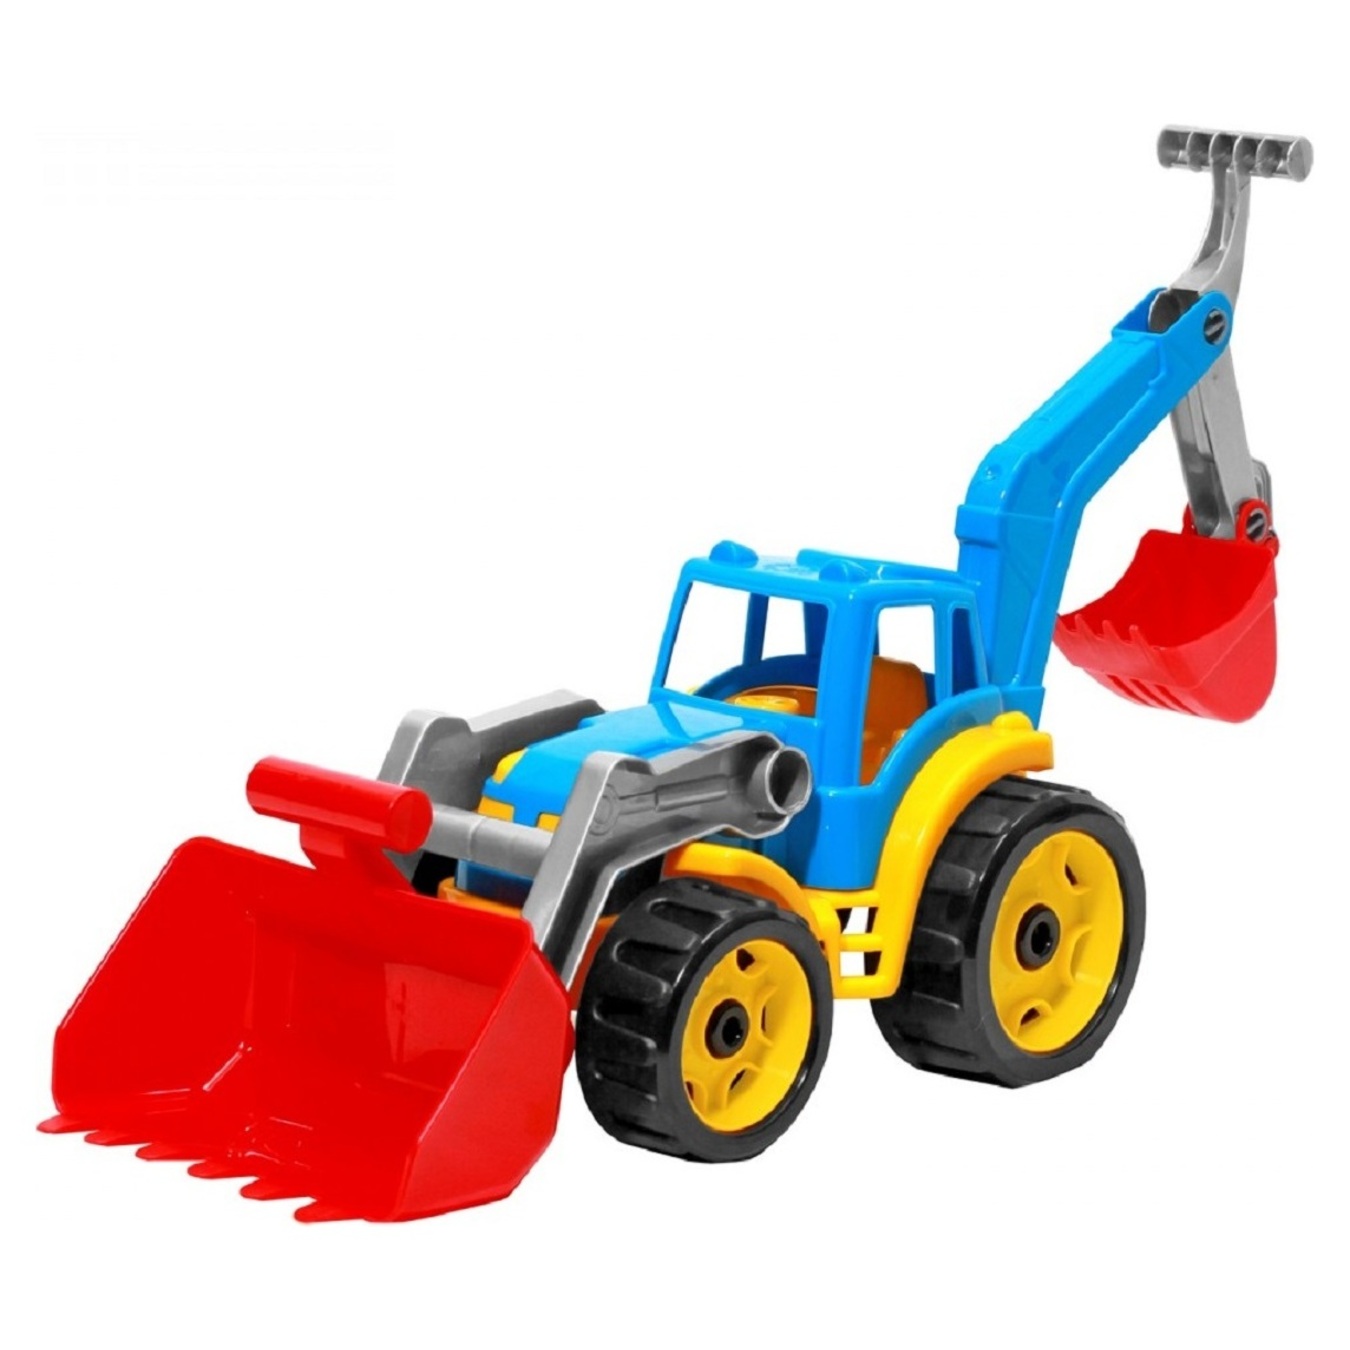 Toy Tractor with two buckets TechnoK